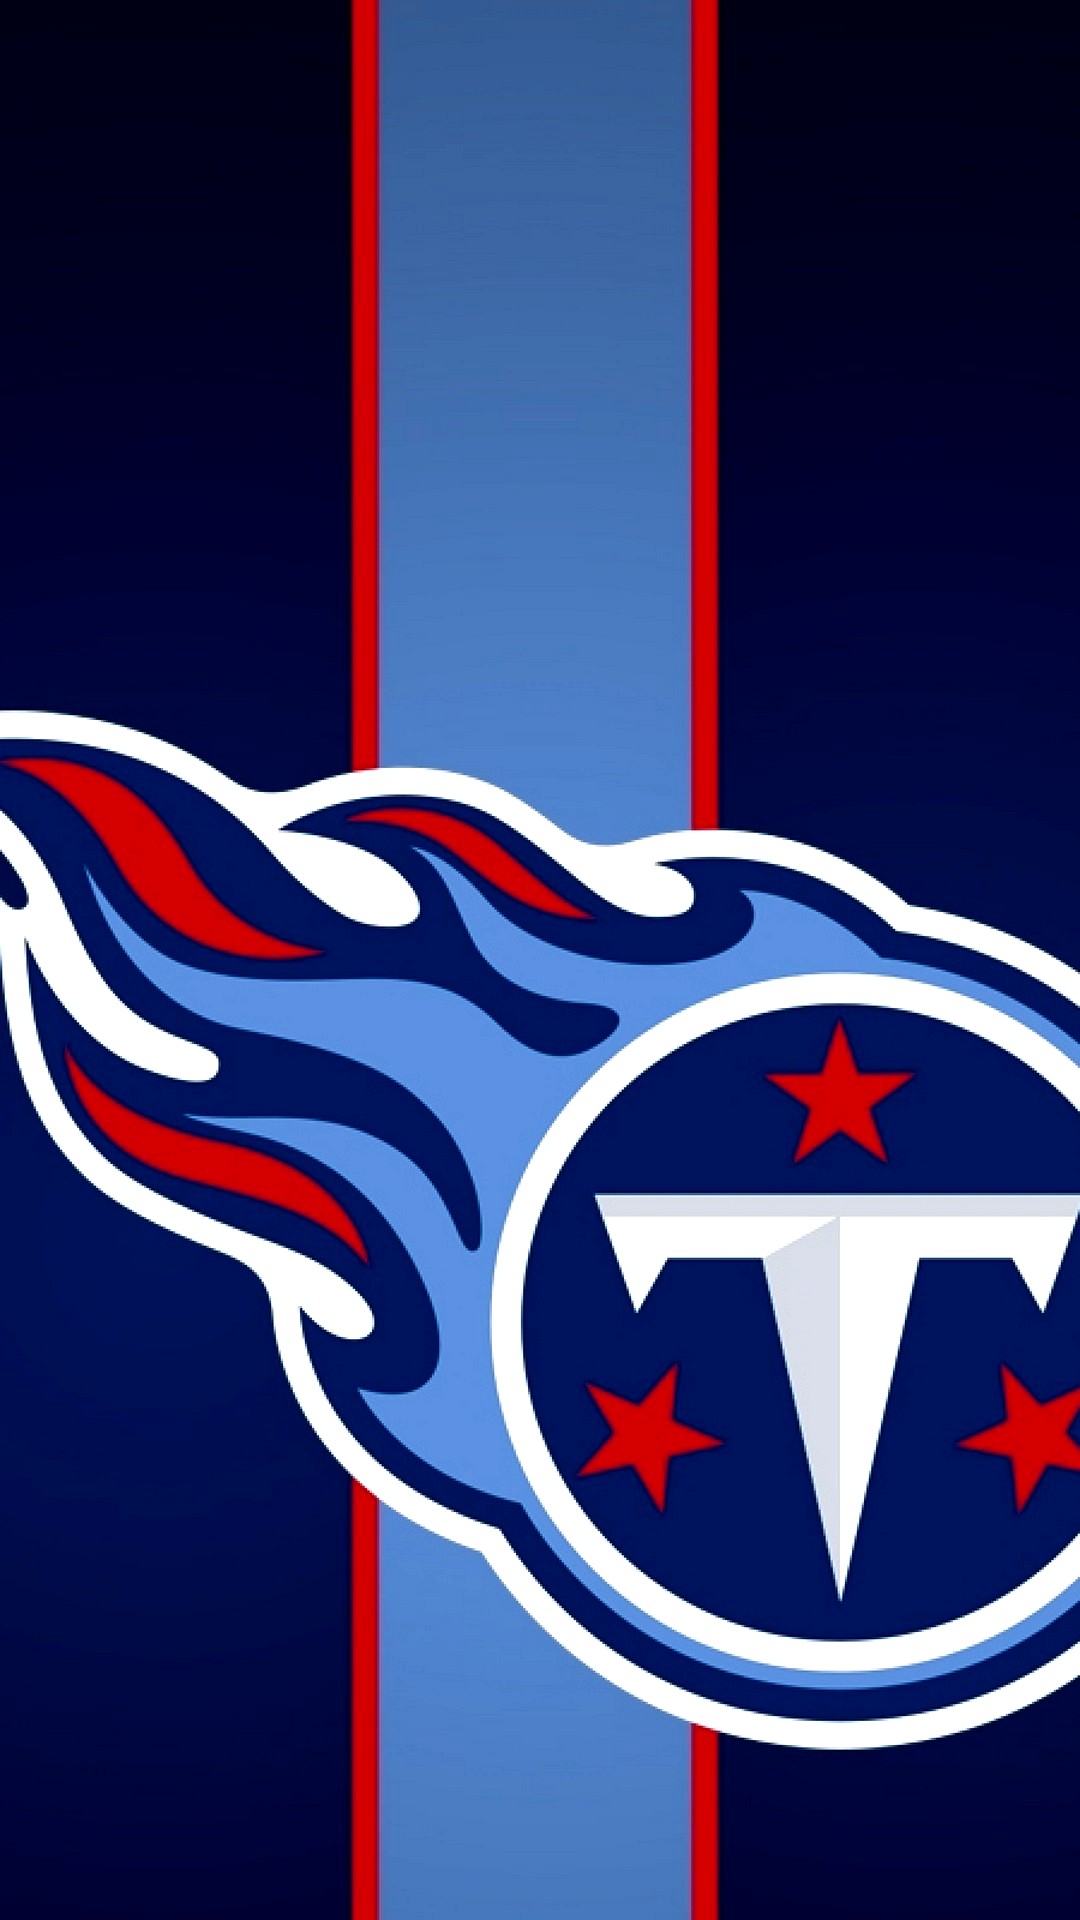 Wallpaper Tennessee Titans Mobile With high-resolution 1080X1920 pixel. You can use this wallpaper for your Mac or Windows Desktop Background, iPhone, Android or Tablet and another Smartphone device